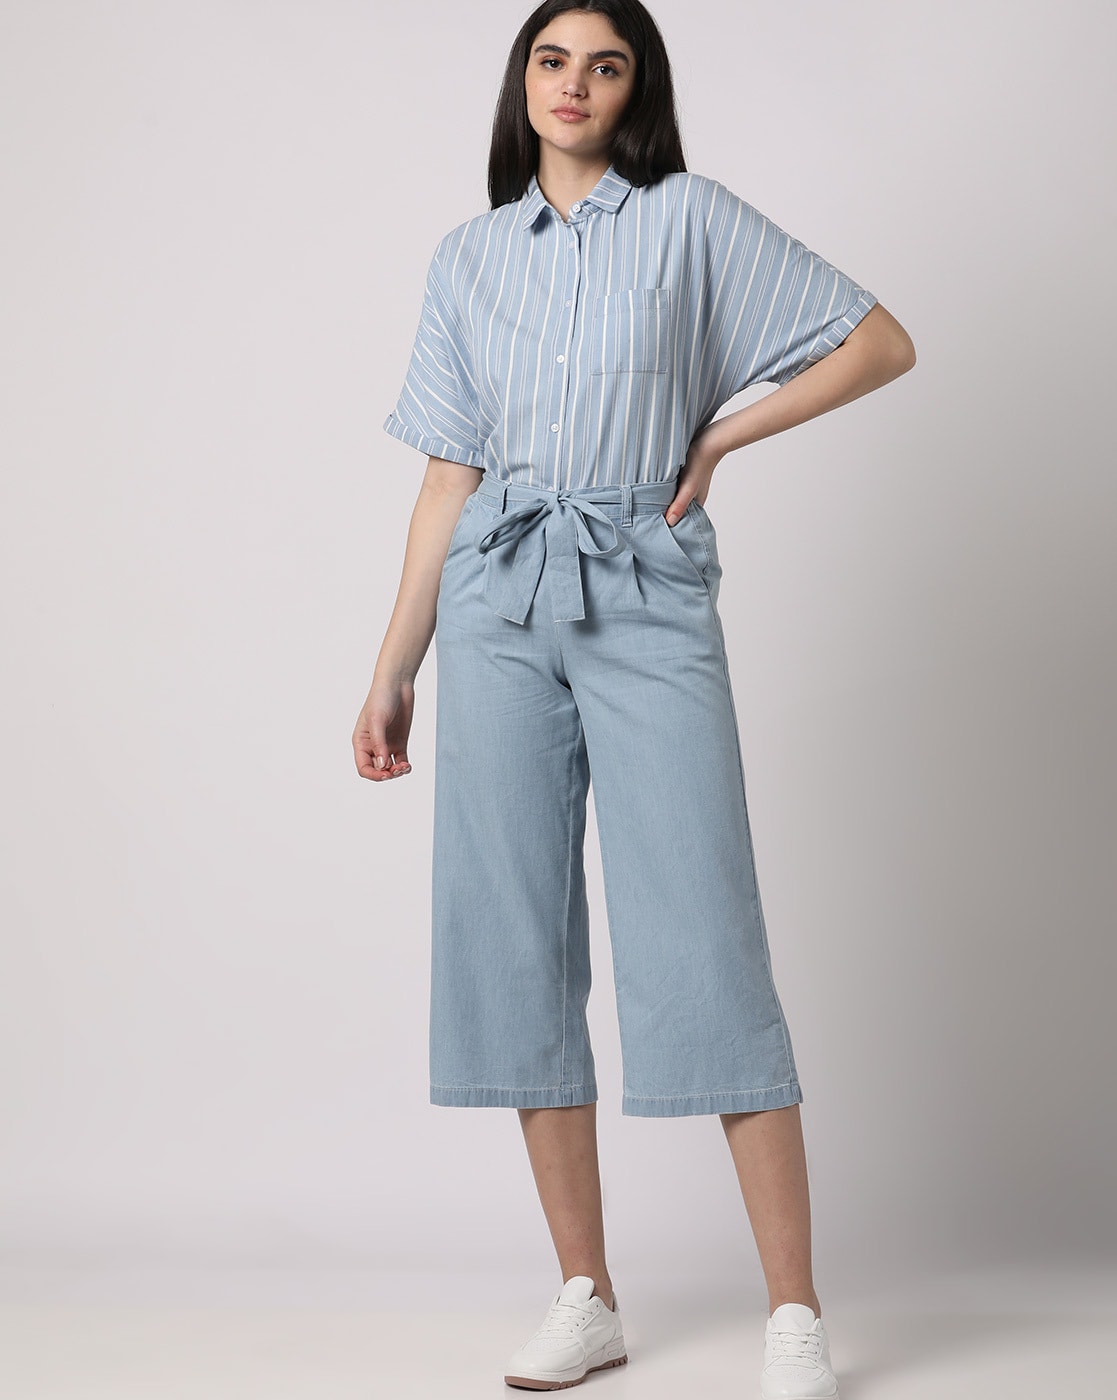 How should I style parallel pants or palazzos for a Western look  Quora